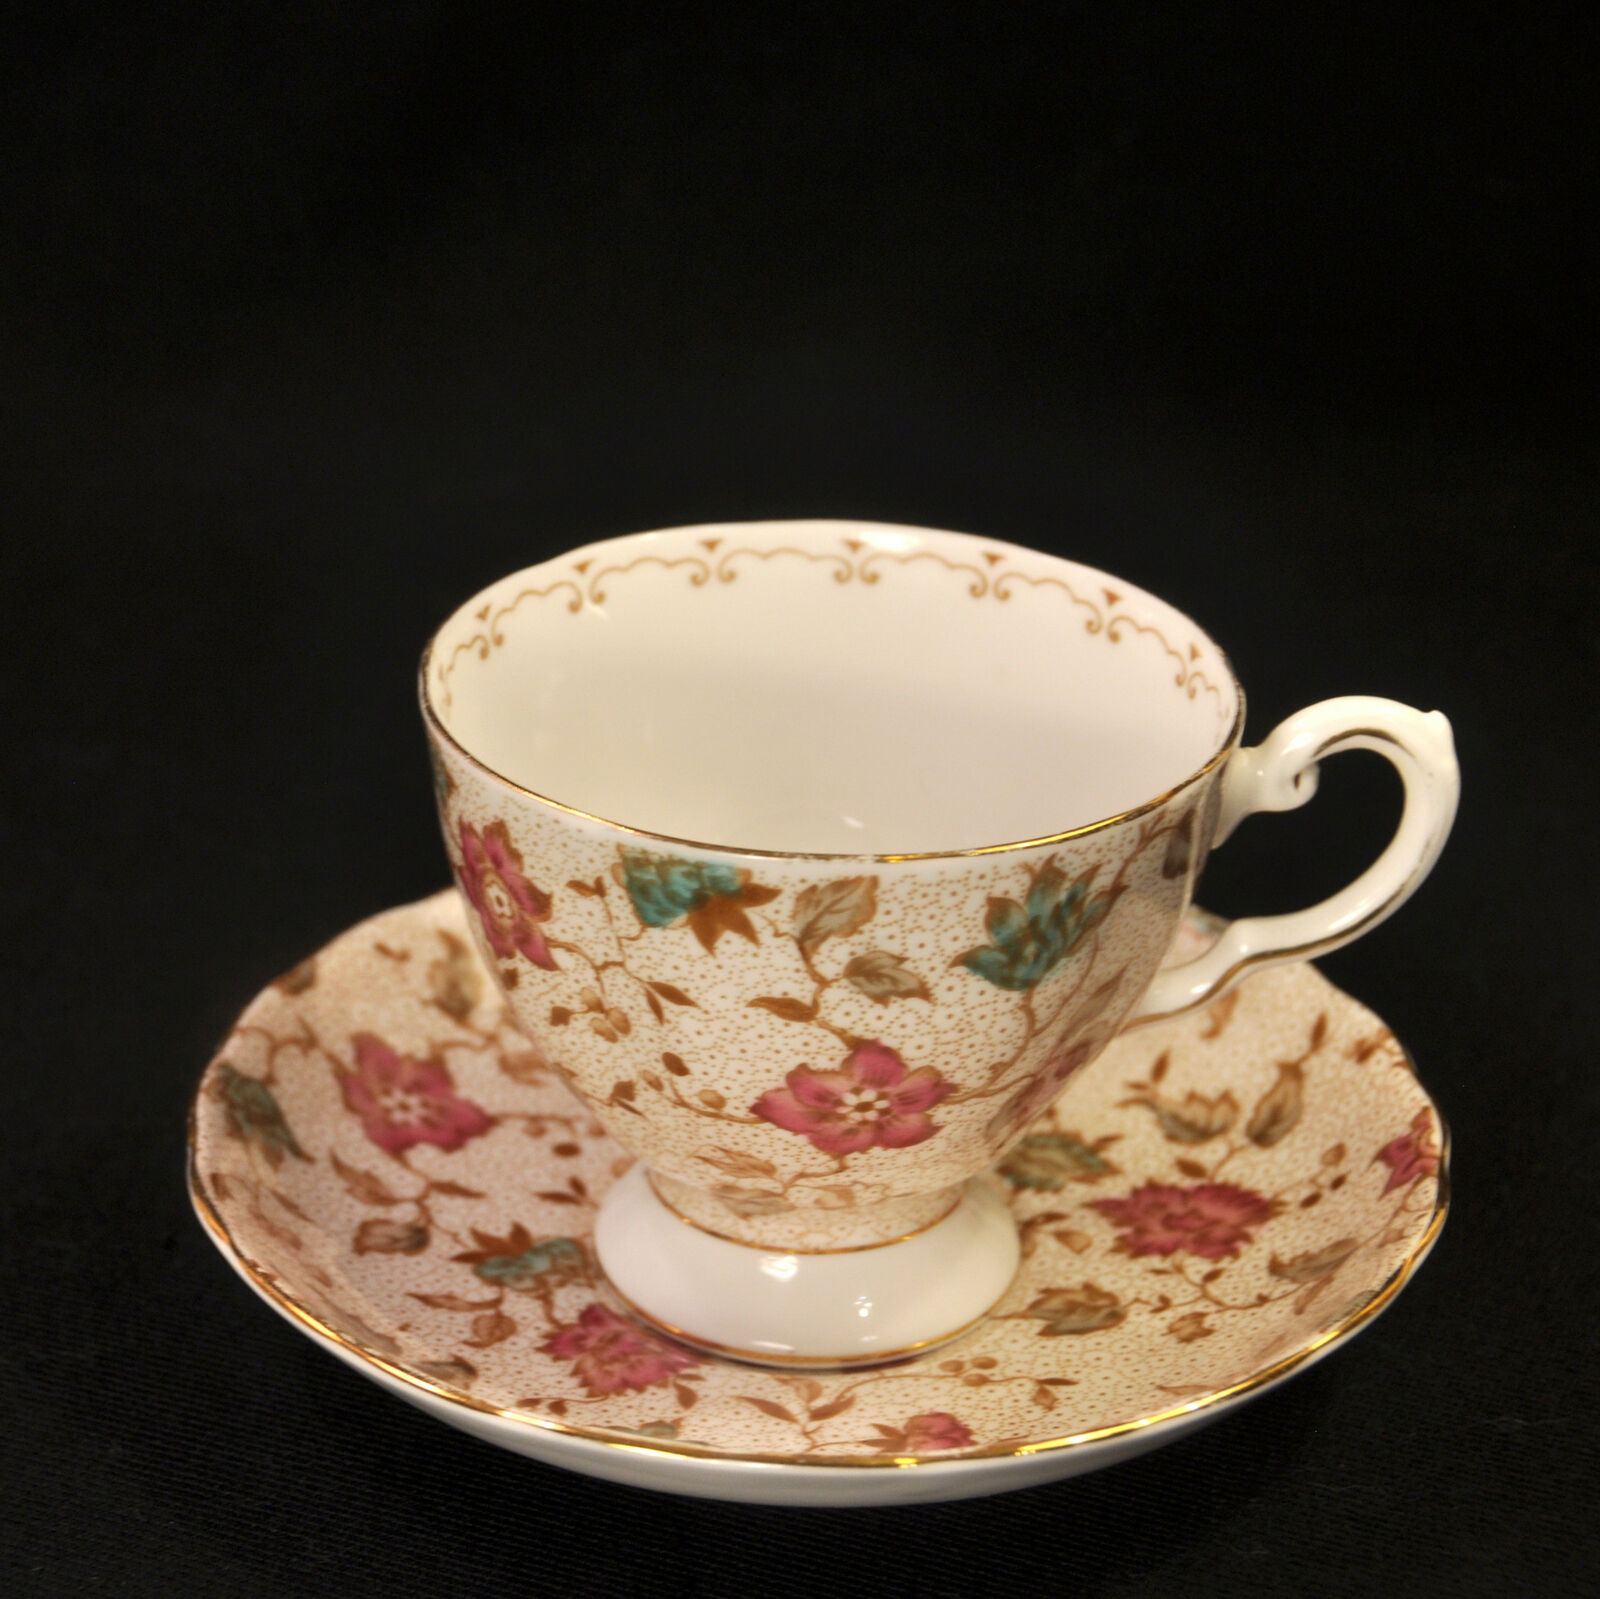 Plant Tuscan Footed Cup & Saucer Multi-color Floral W/seafoam & Gold 1947-1960